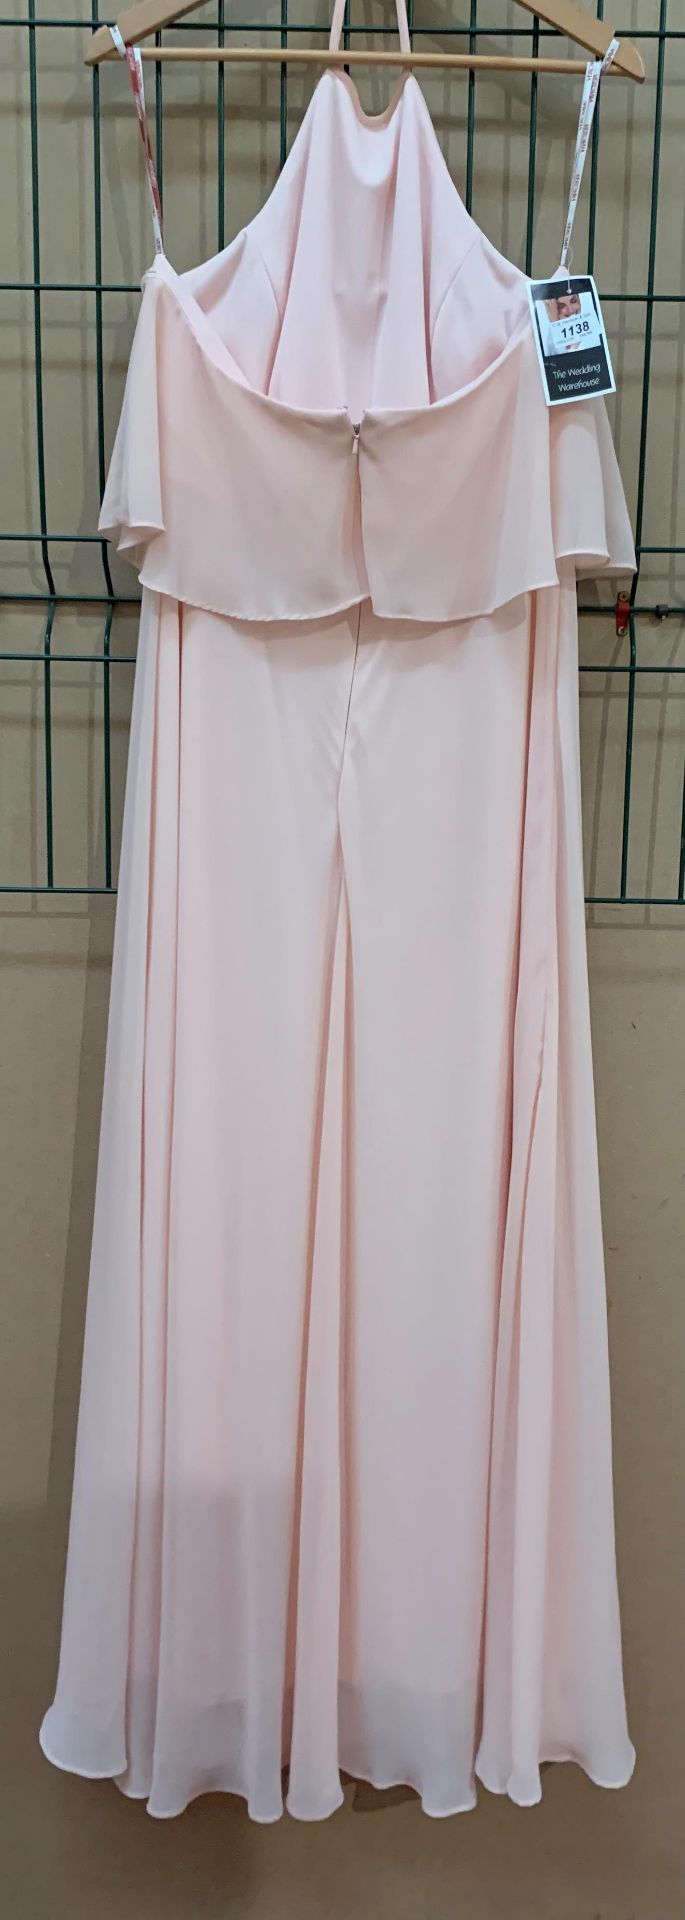 A bridesmaid/prom dress by Veromia, mode - Image 2 of 2